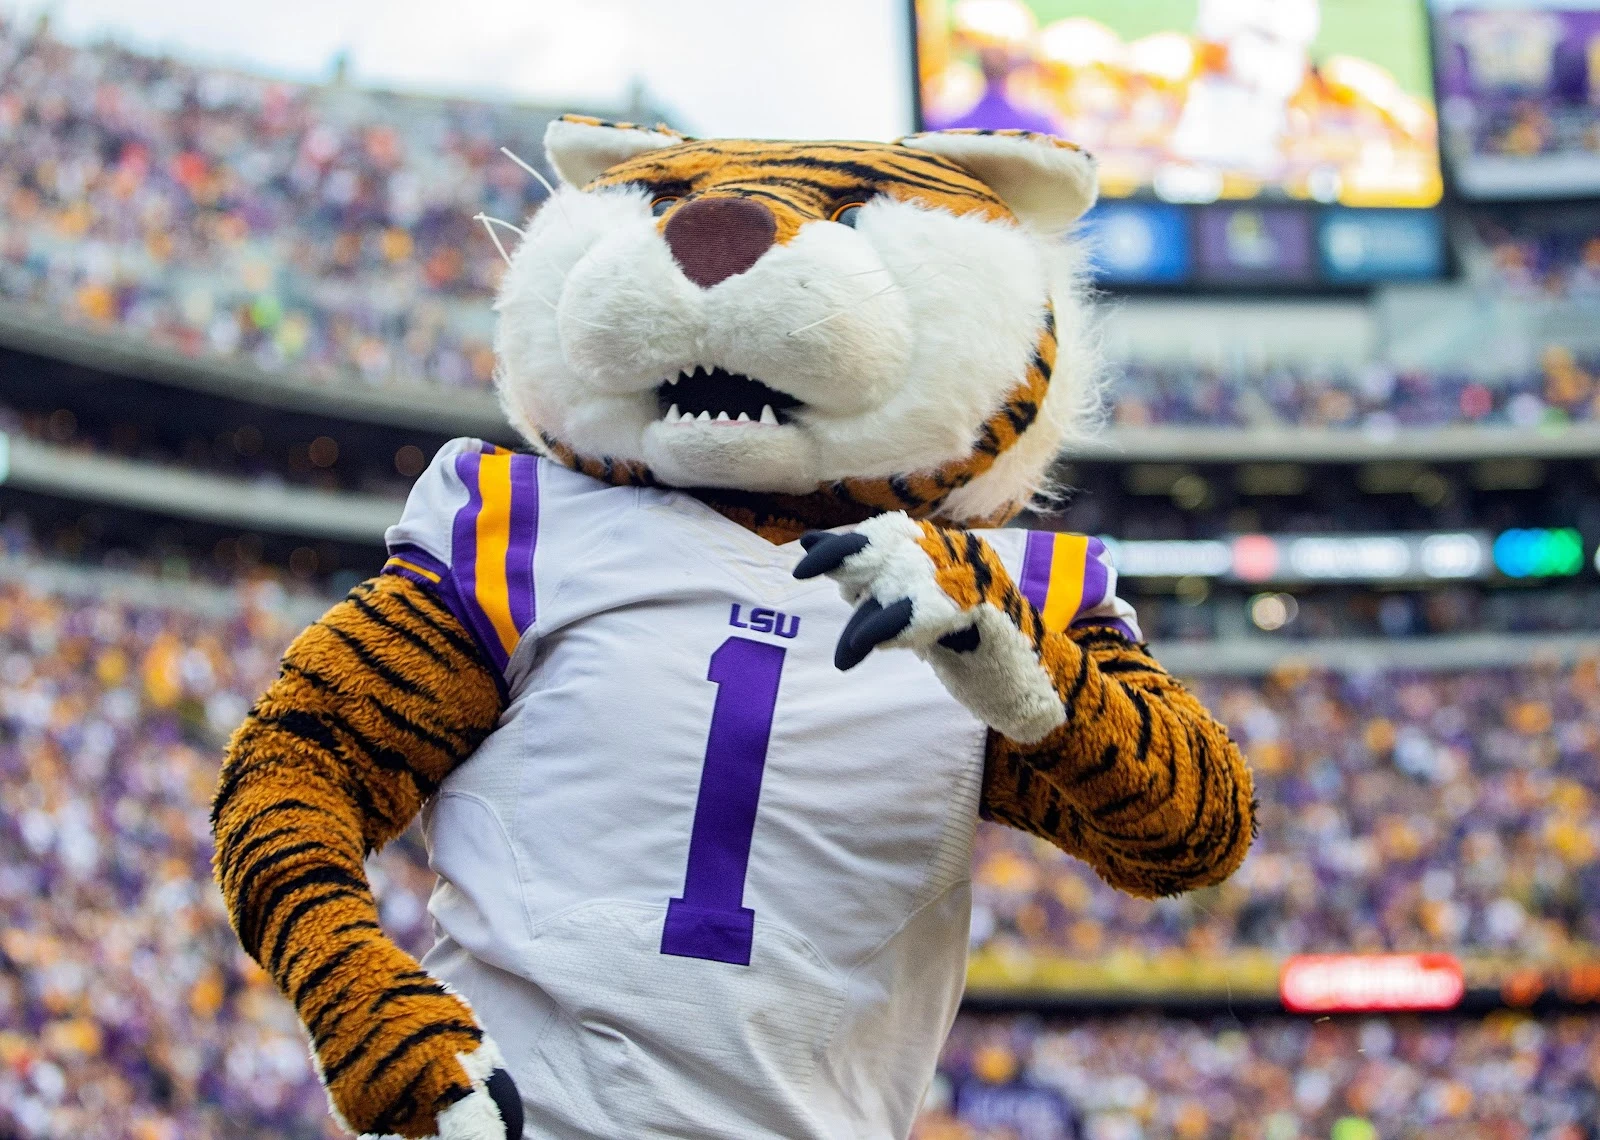 The costumed Mike the Tiger entertains the crowd during a game between the LSU Tigers and the Auburn Tigers.